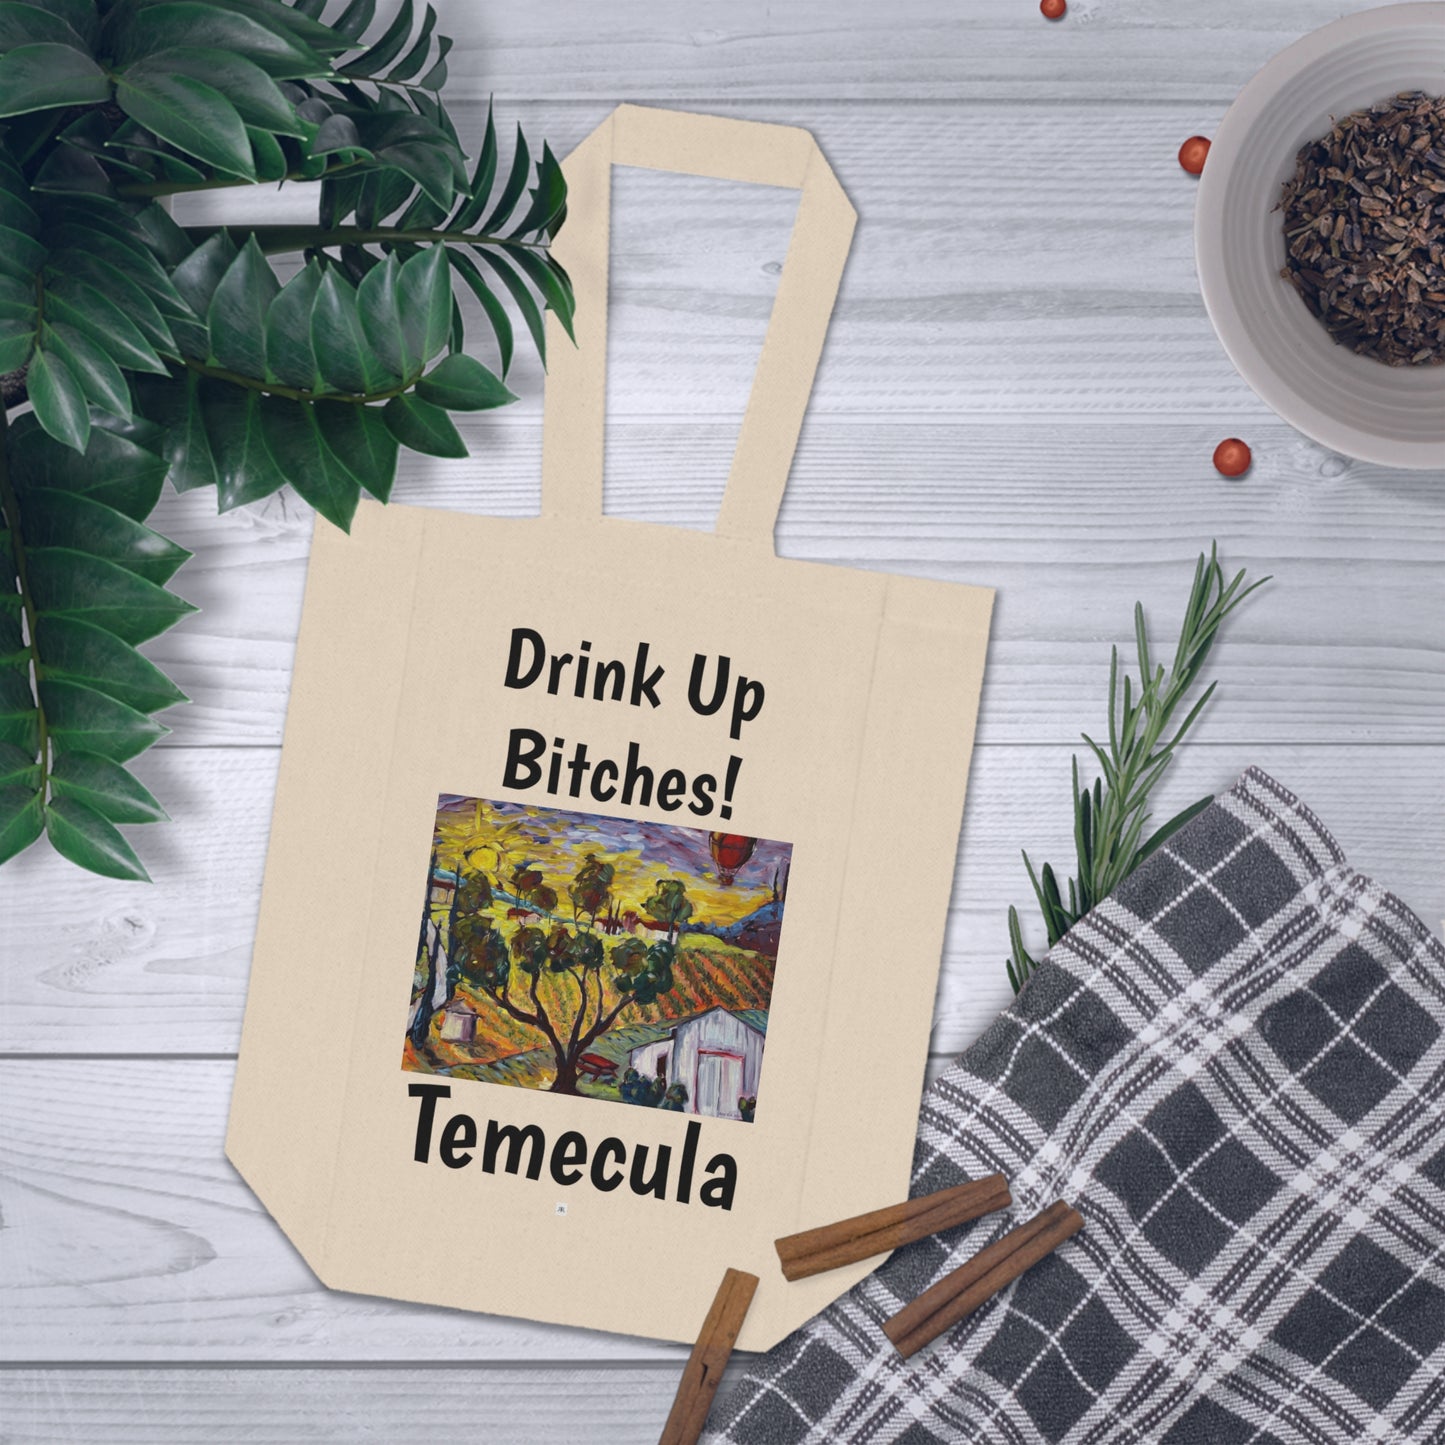 Drink up Bitches! Temecula Double Wine Tote Bag featuring "Good morning Wine Country" painting